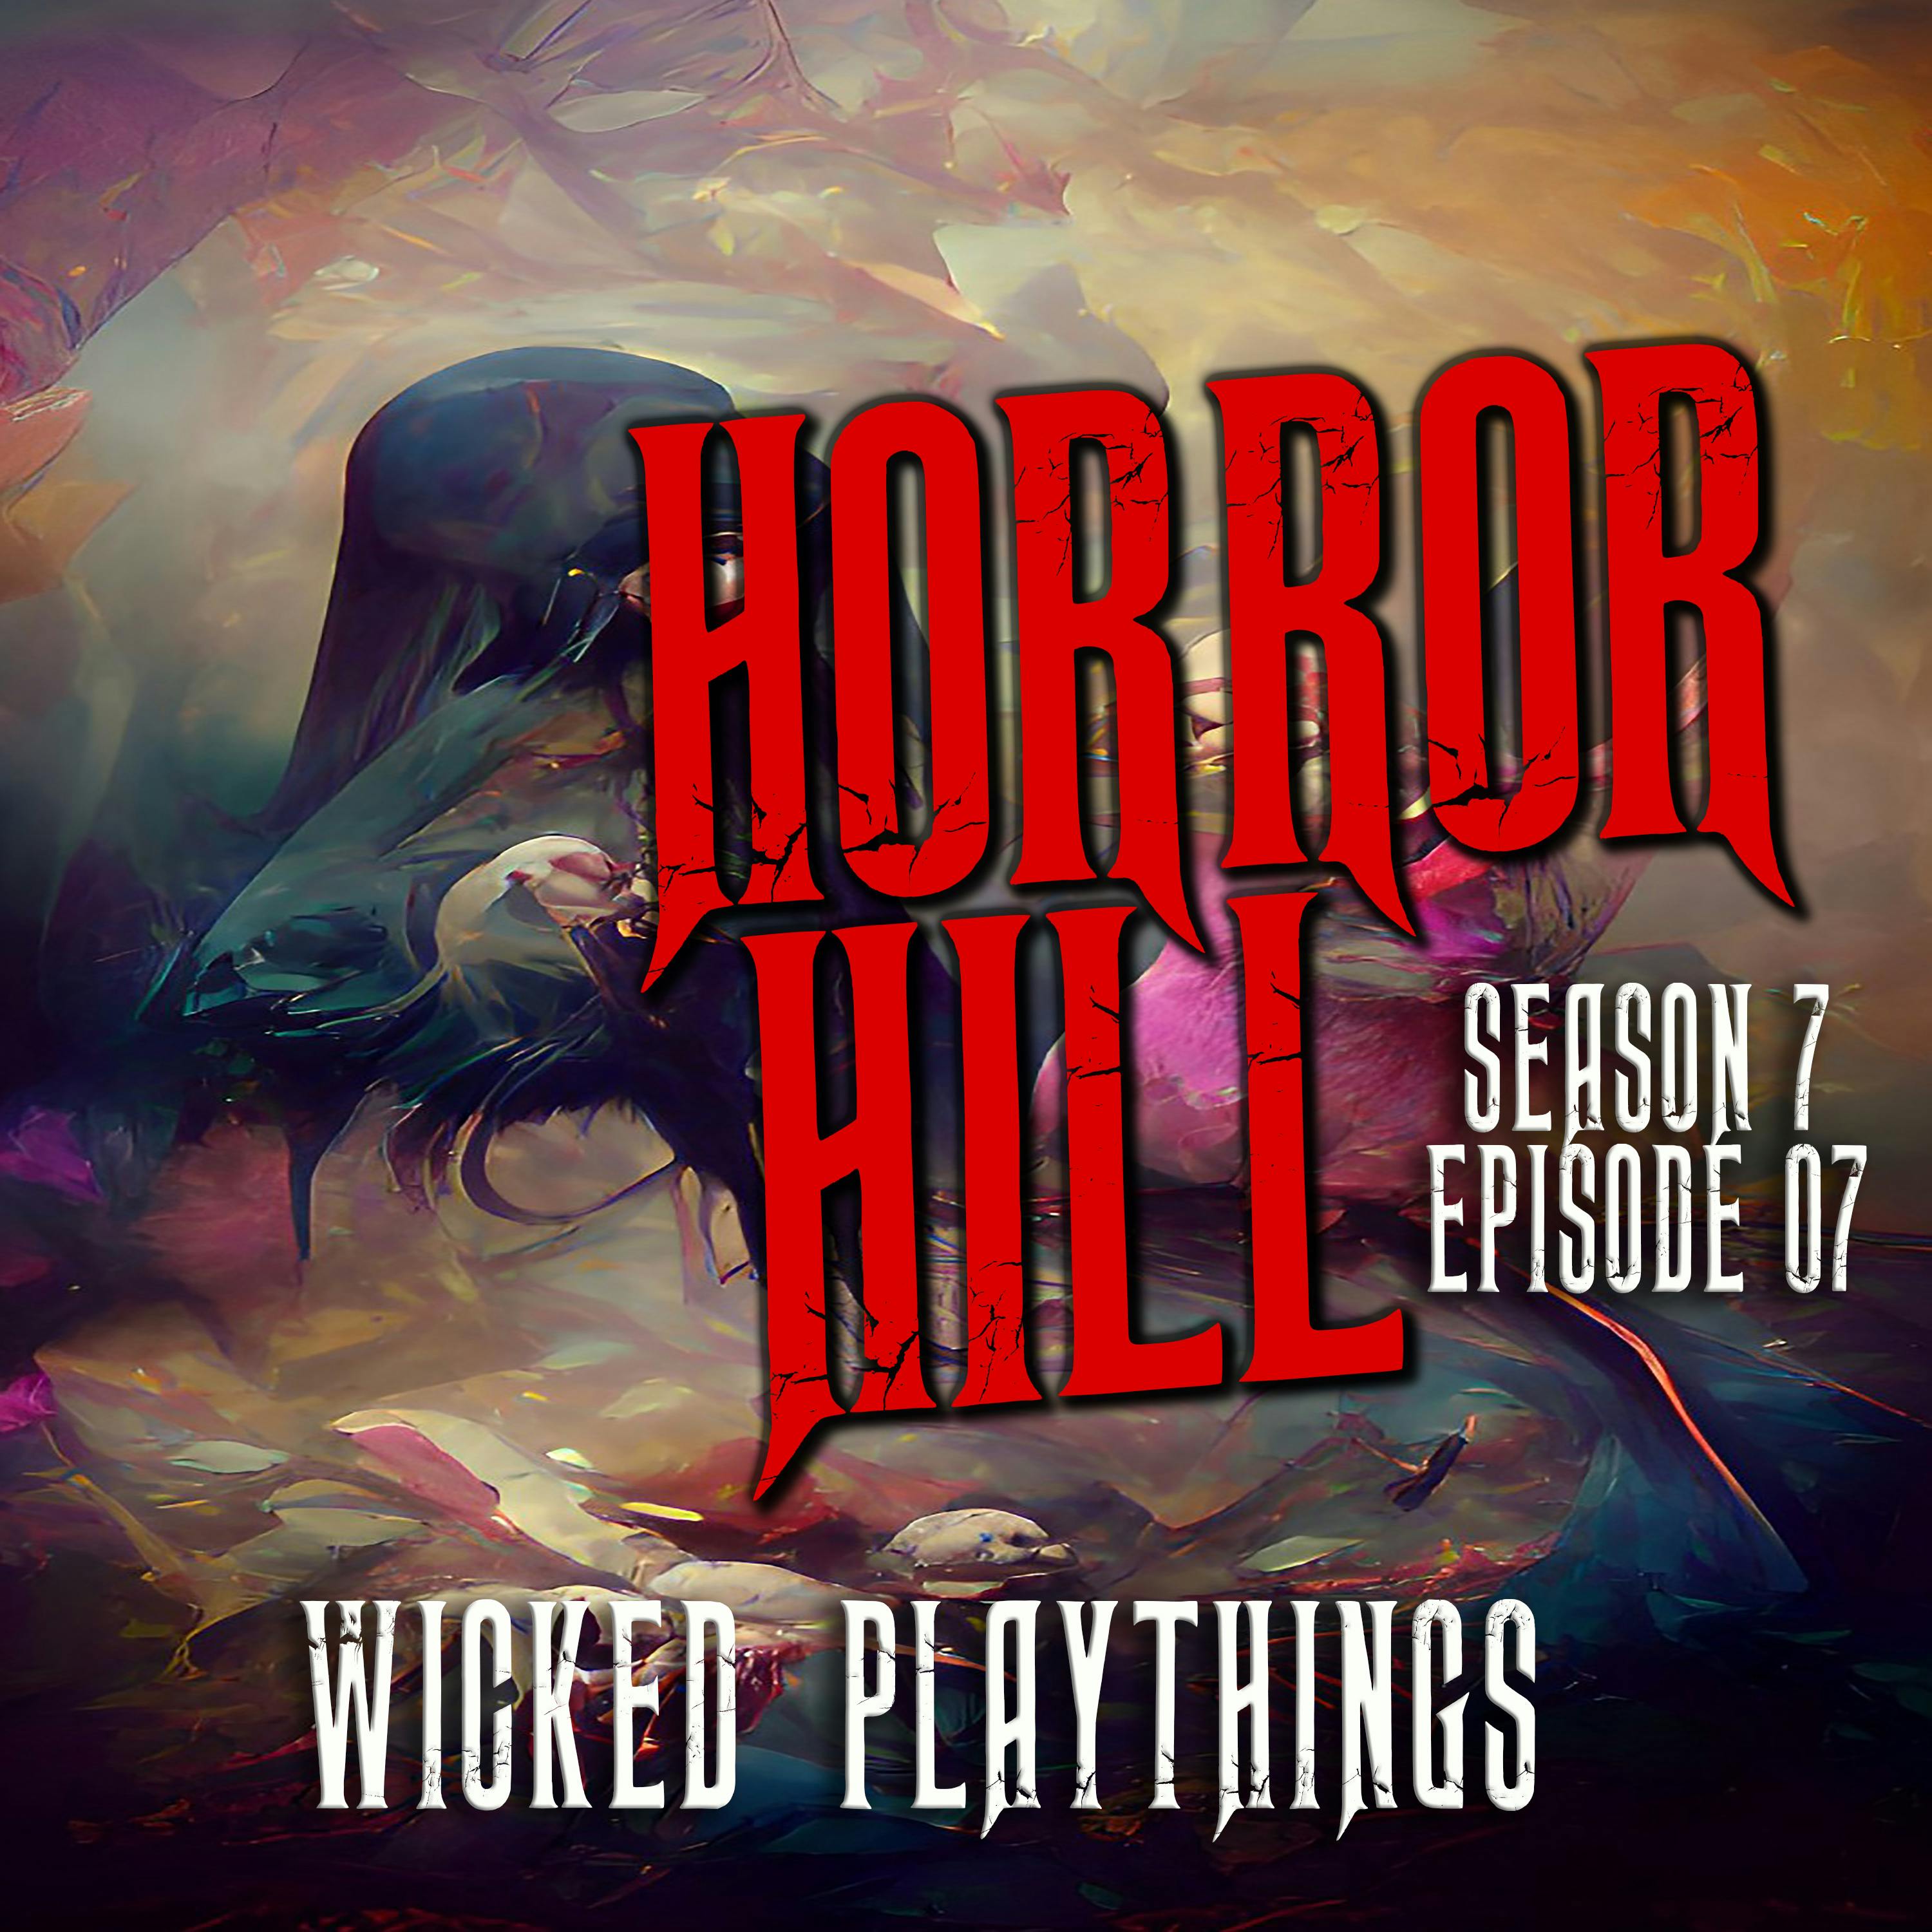 S7E07 - "Wicked Playthings" - Horror Hill